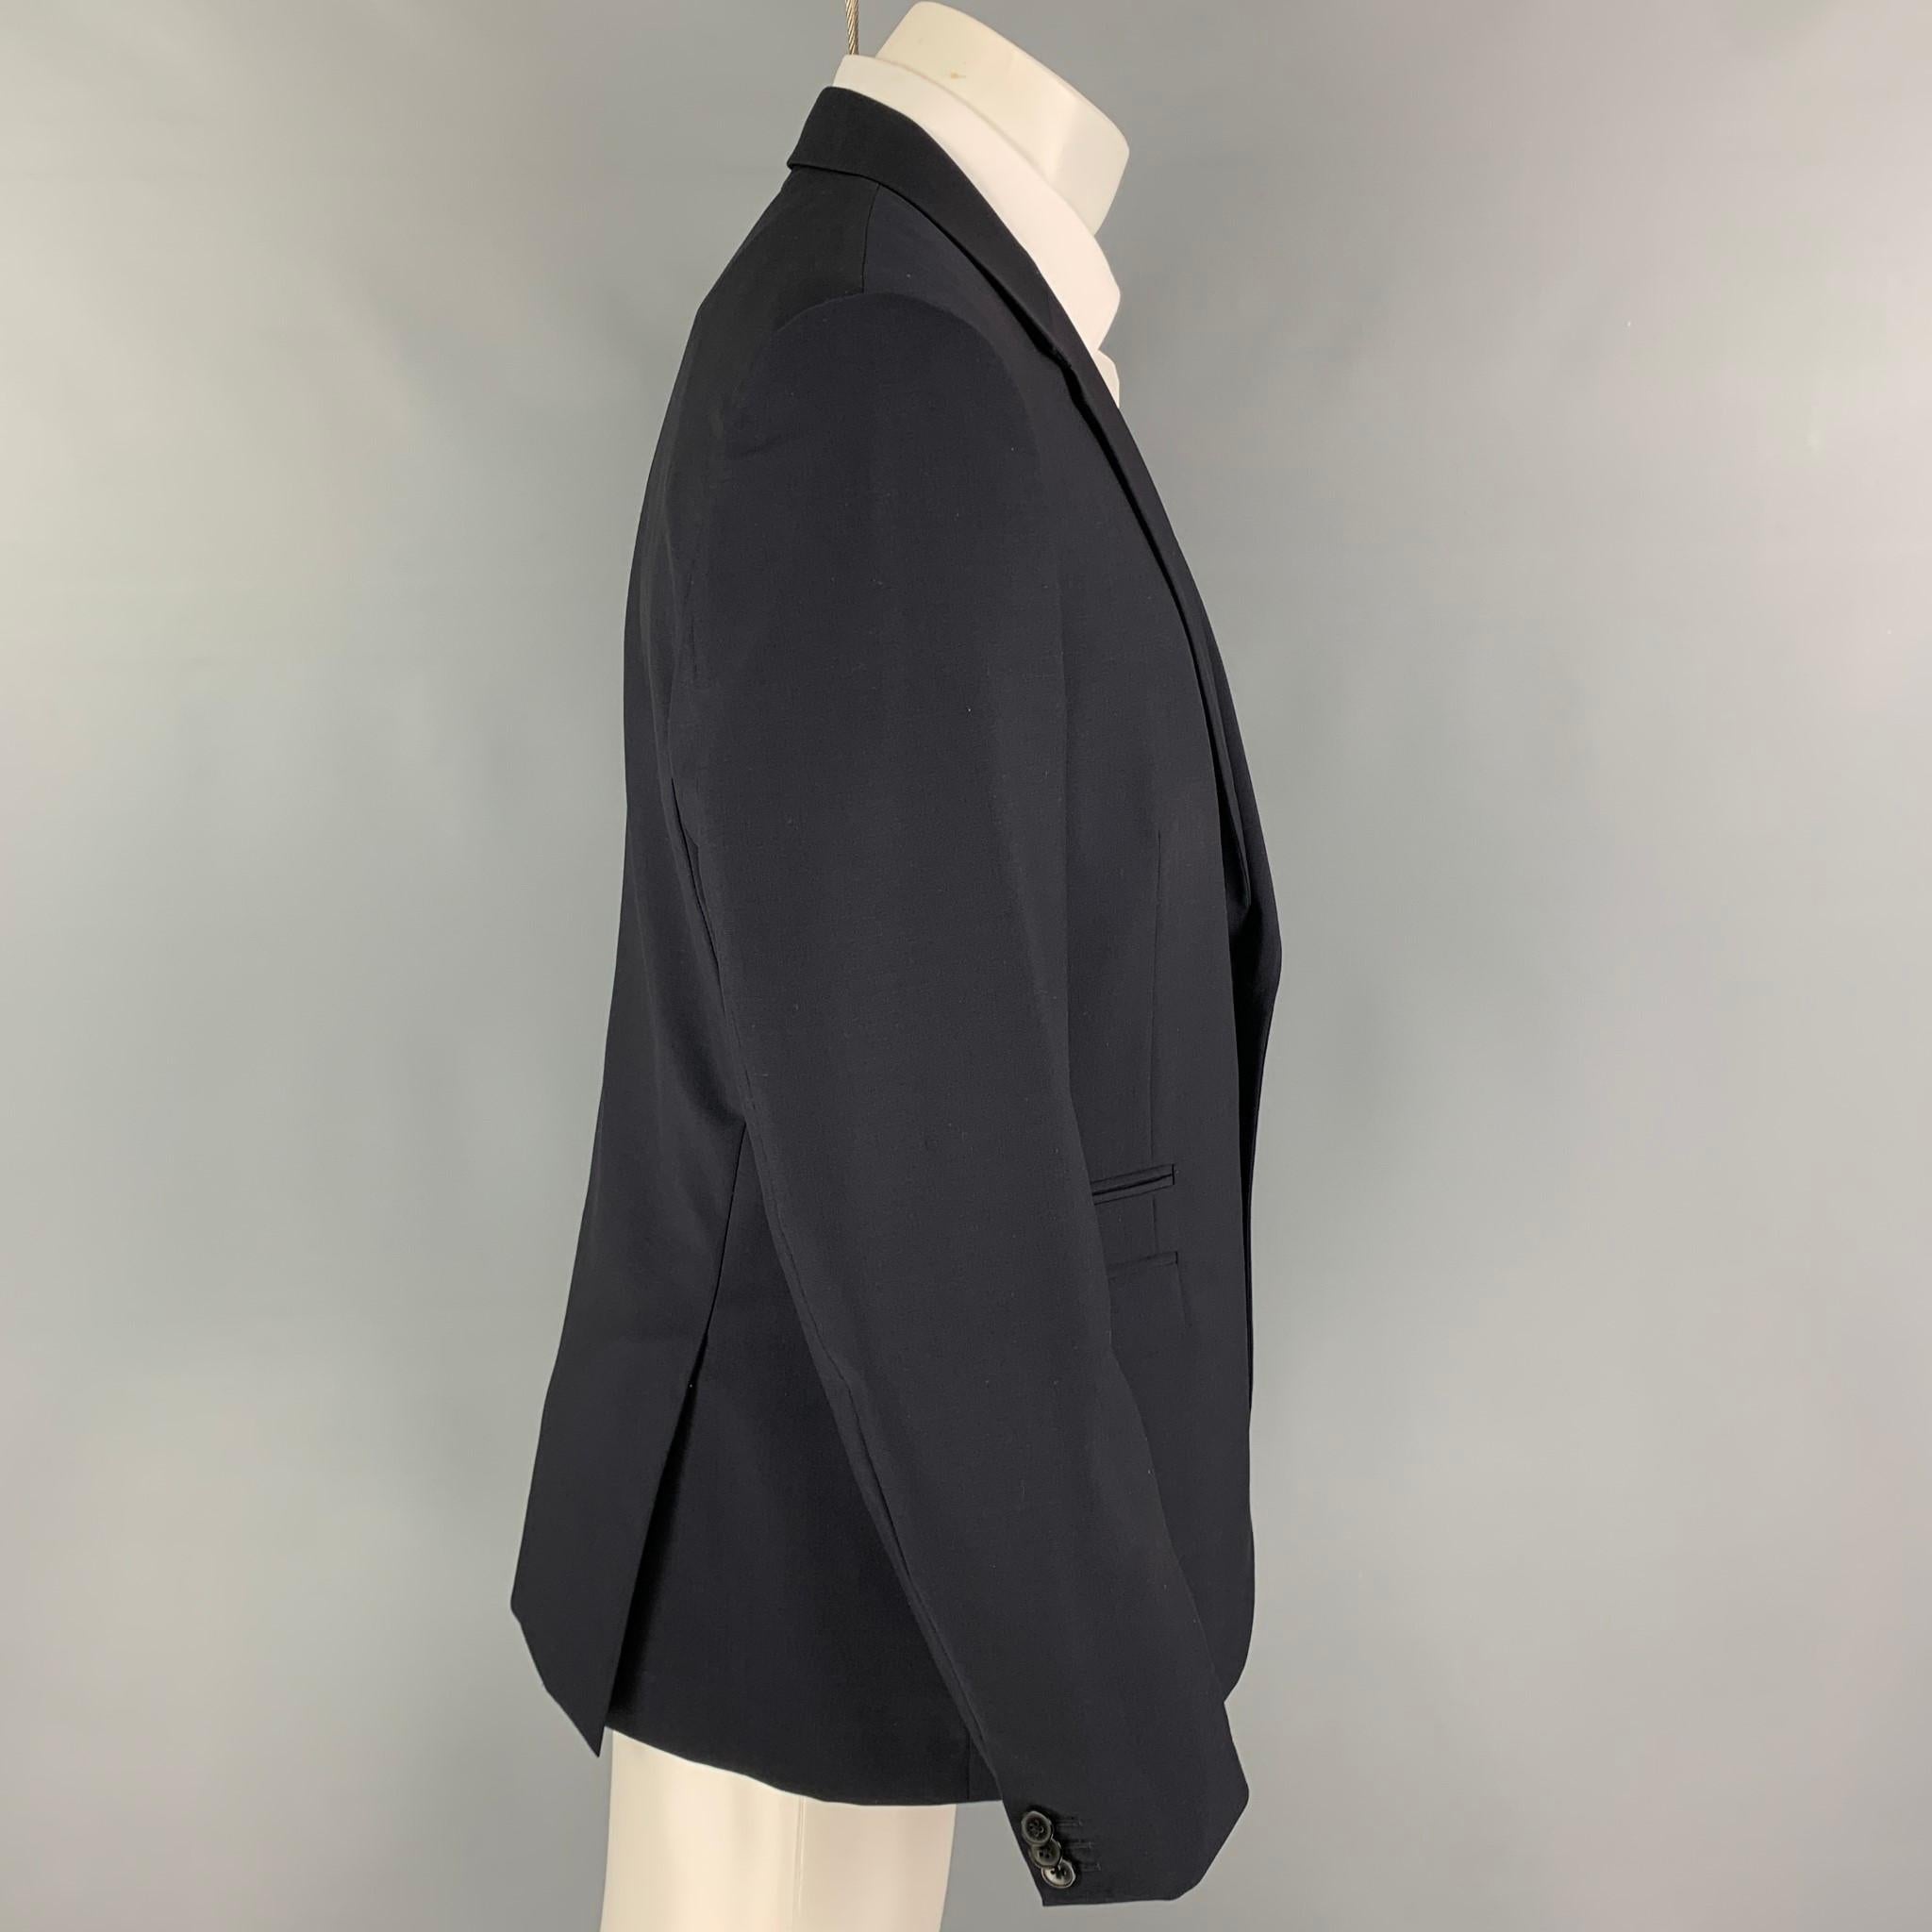 VALENTINO sport coat comes in a navy wool /mohair featuring a notch lapel, flap pockets, double back vent, and a double button closure. Made in Italy.

Excellent Pre-Owned Condition.
Marked: 52

Measurements:

Shoulder: 18.5 in.
Chest: 42